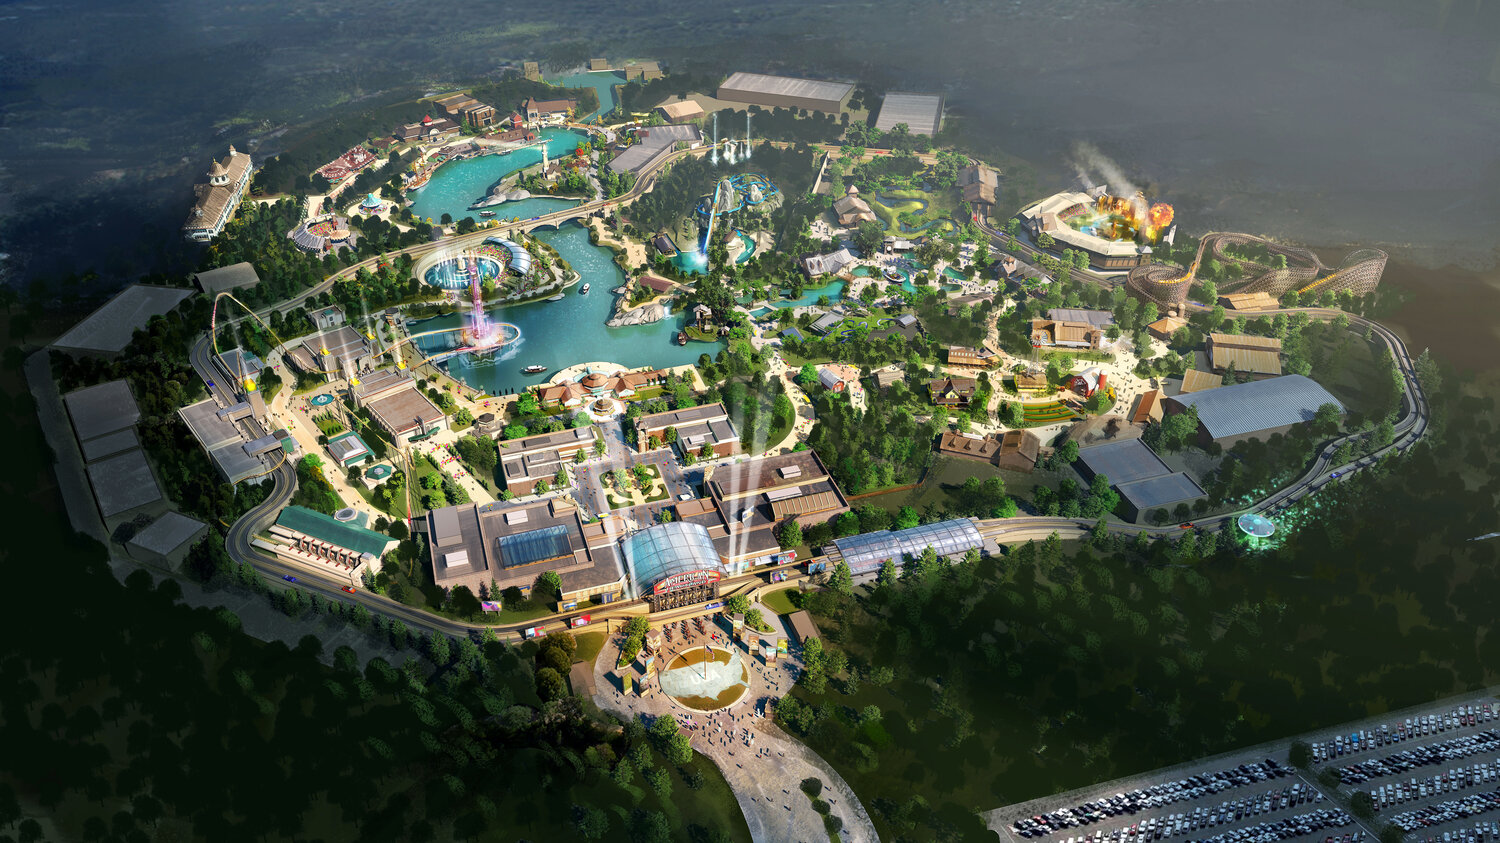 American Heartland Theme Park and Resort is a project from Branson company Mansion Entertainment Group.